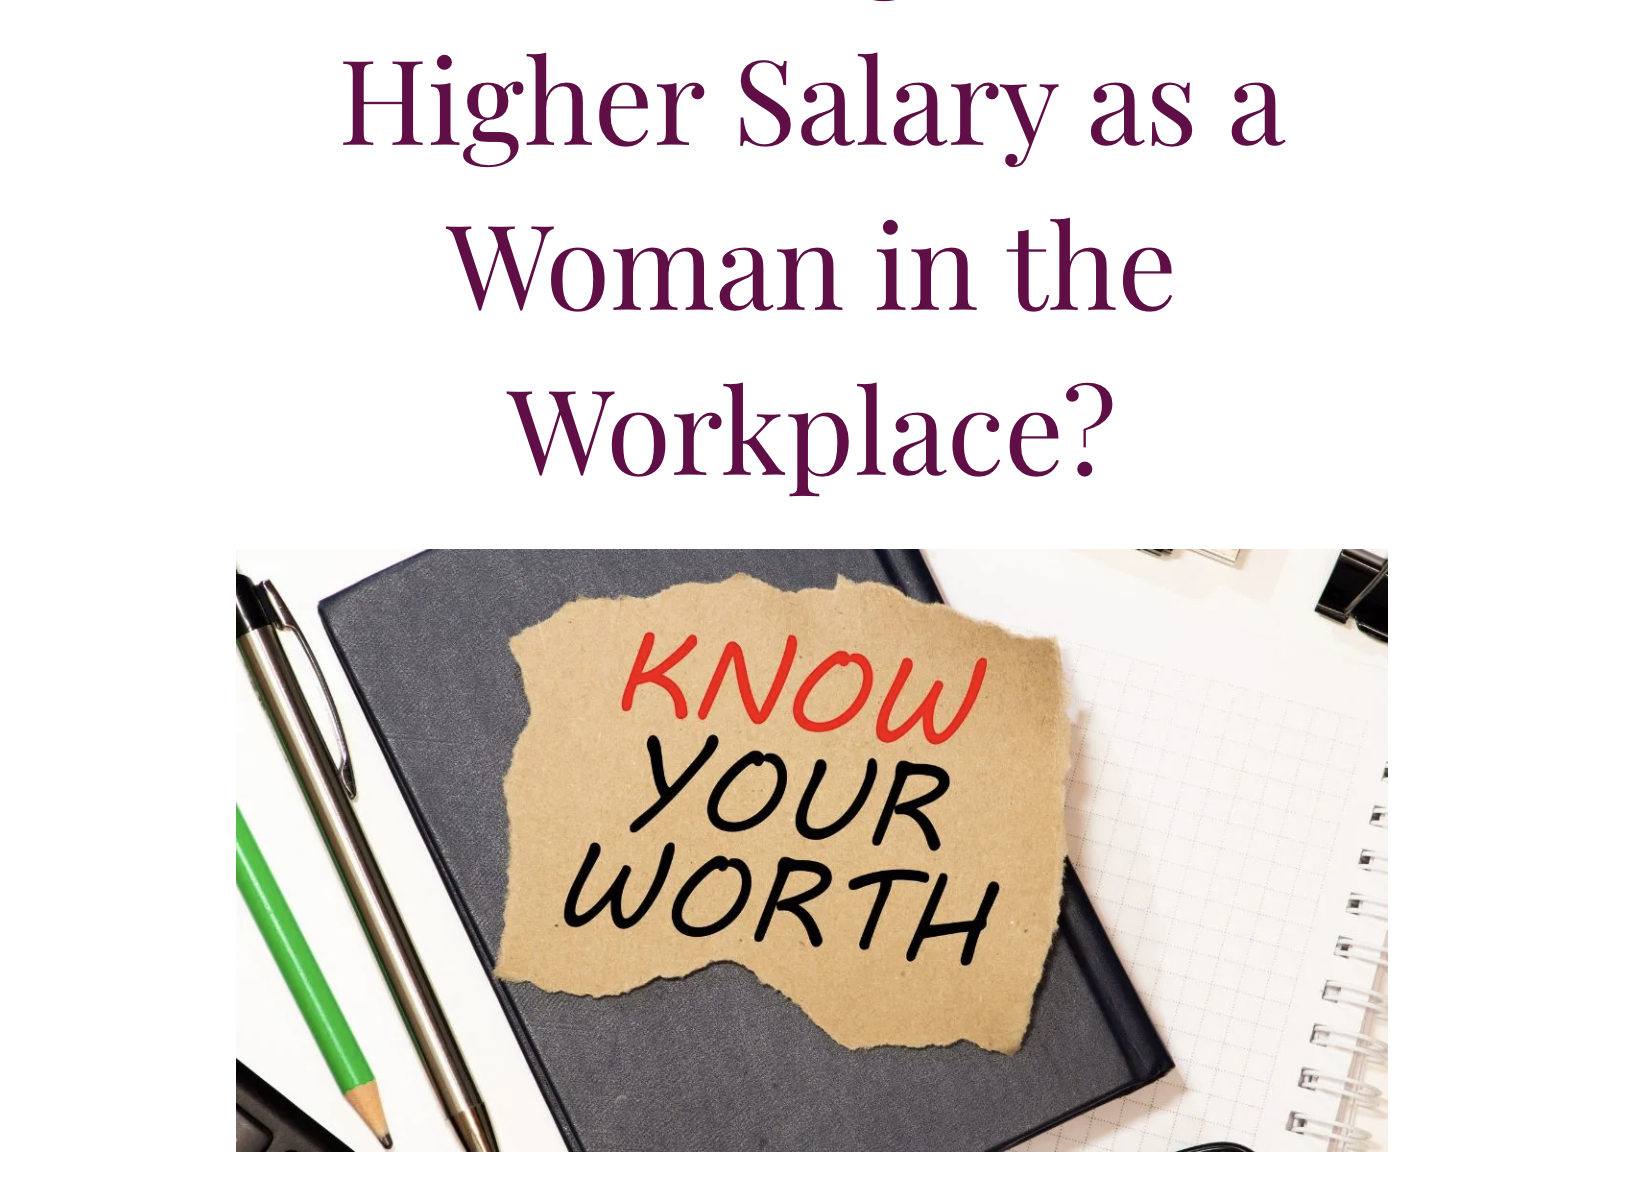 How to Negotiate a Higher Salary as a Woman in the Workplace?